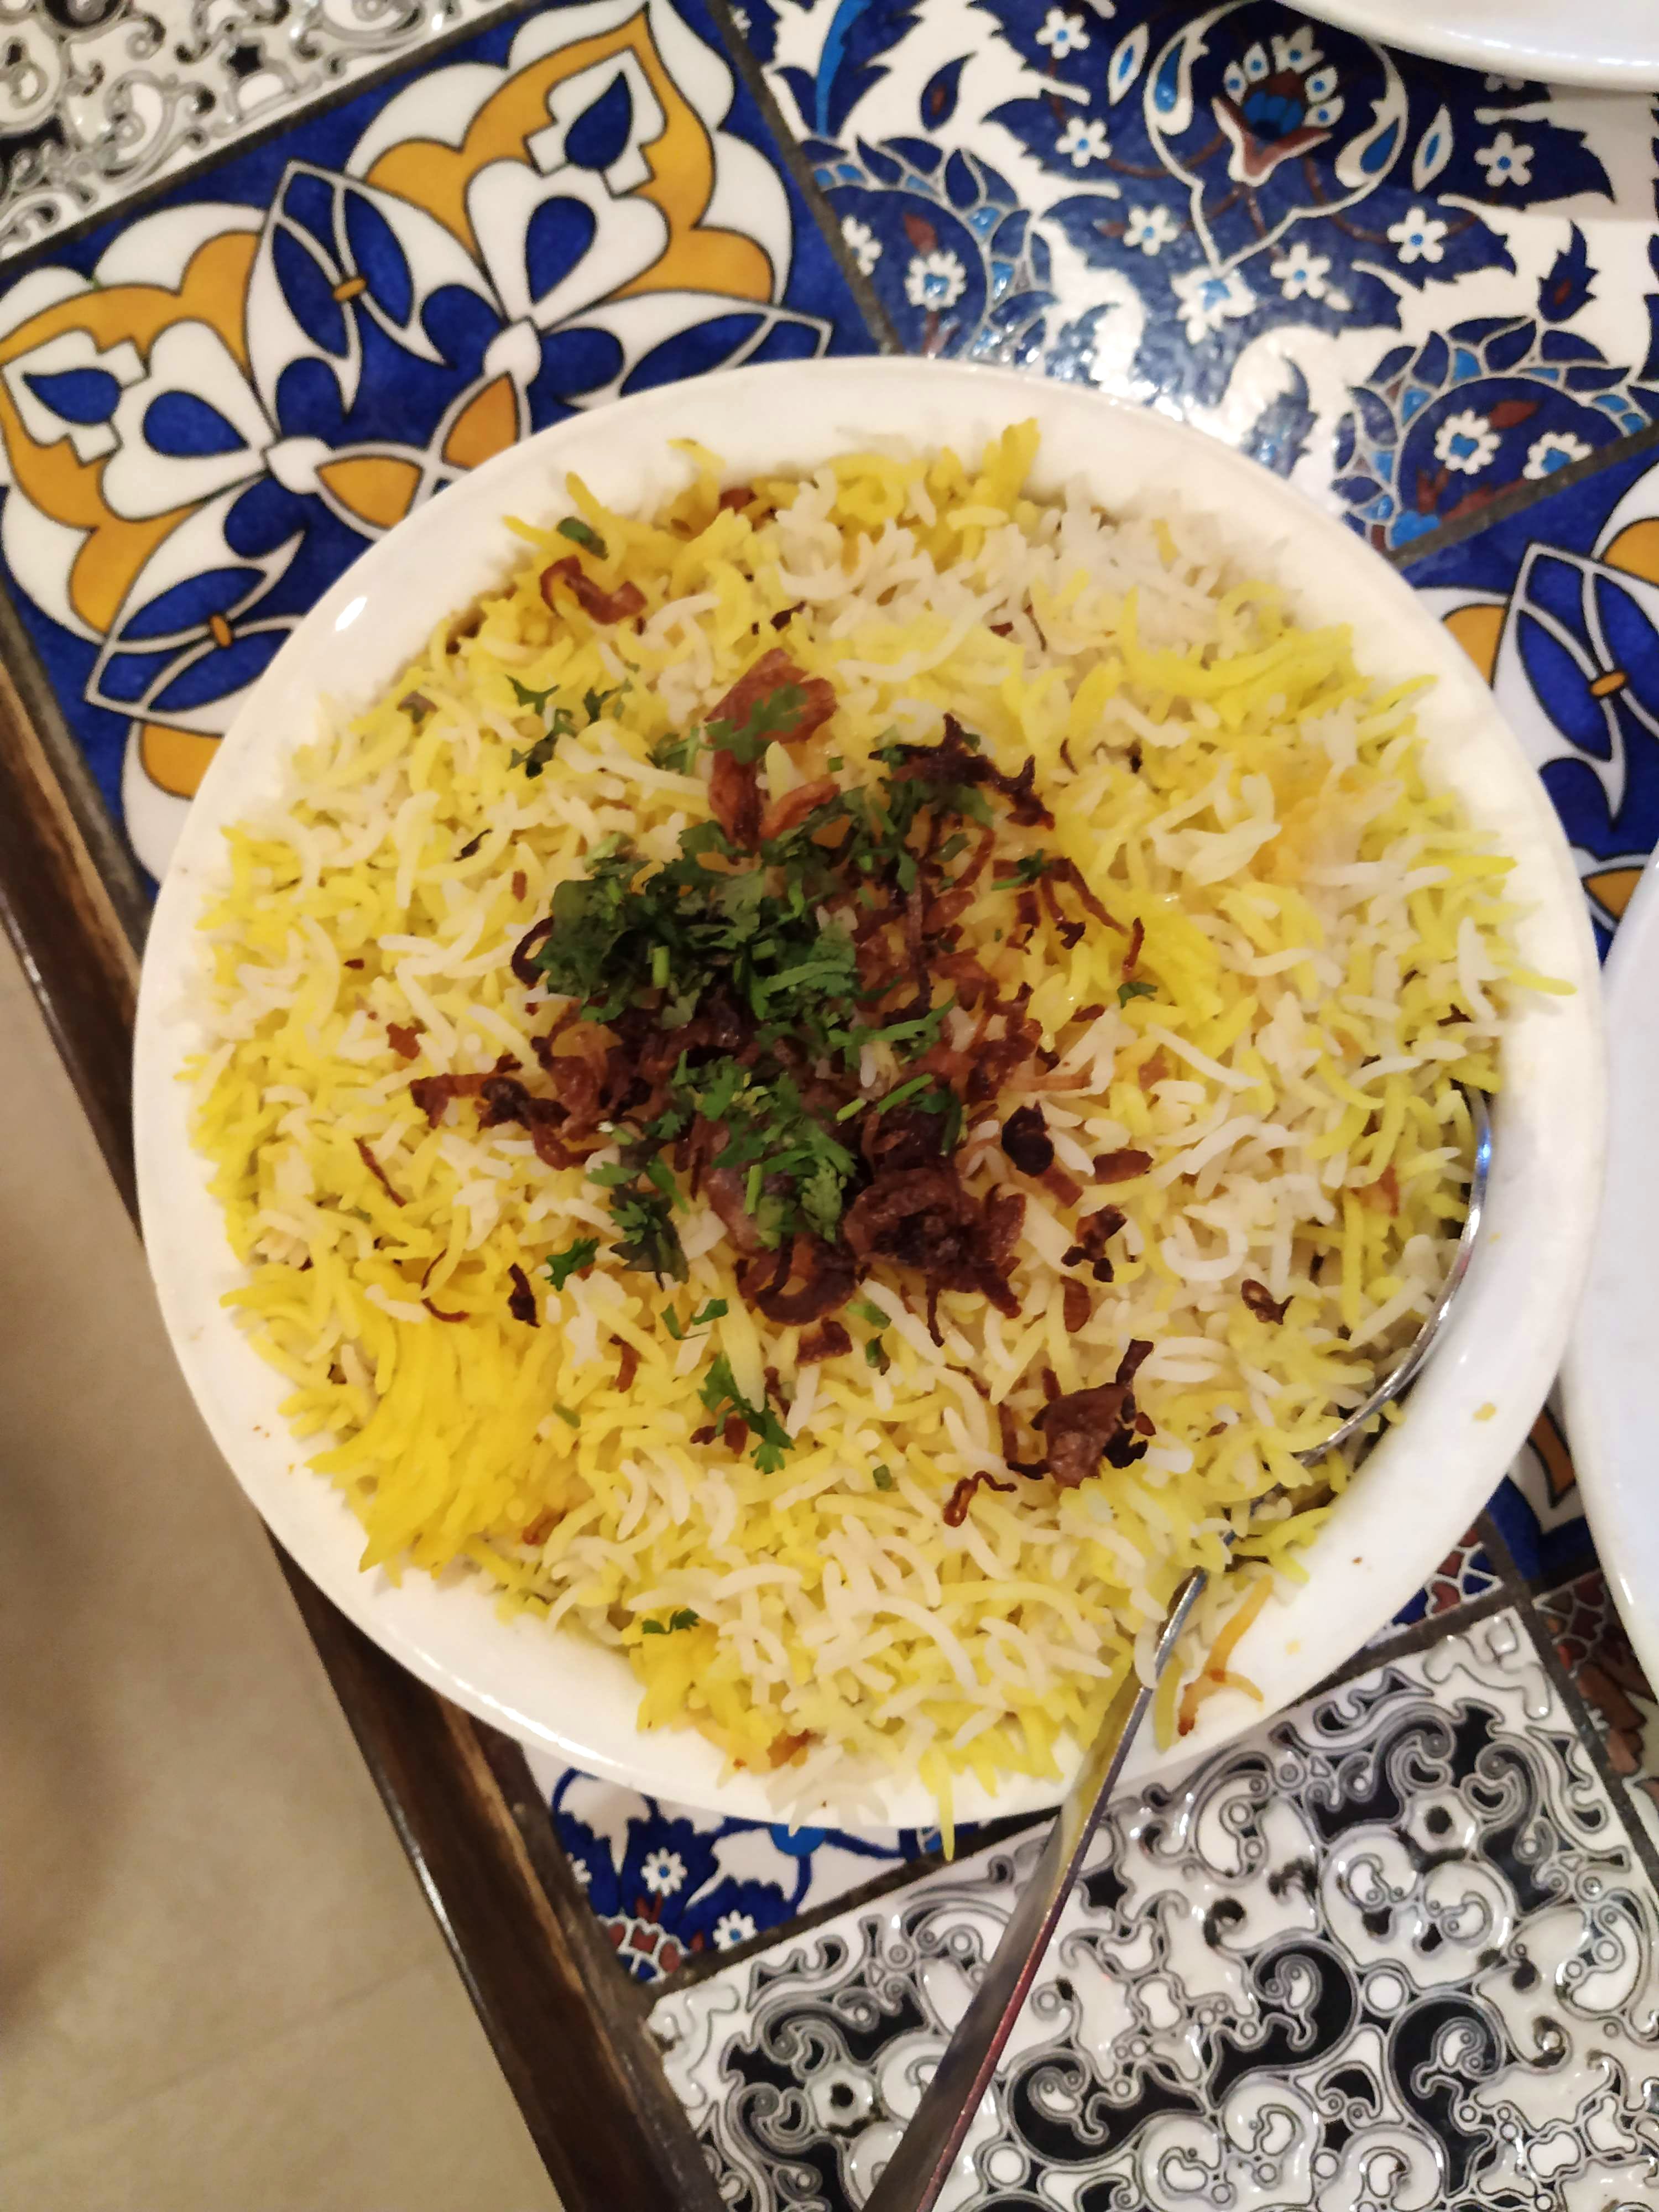 Dish,Spiced rice,Food,Cuisine,Steamed rice,Ingredient,Rice,White rice,Basmati,Pilaf